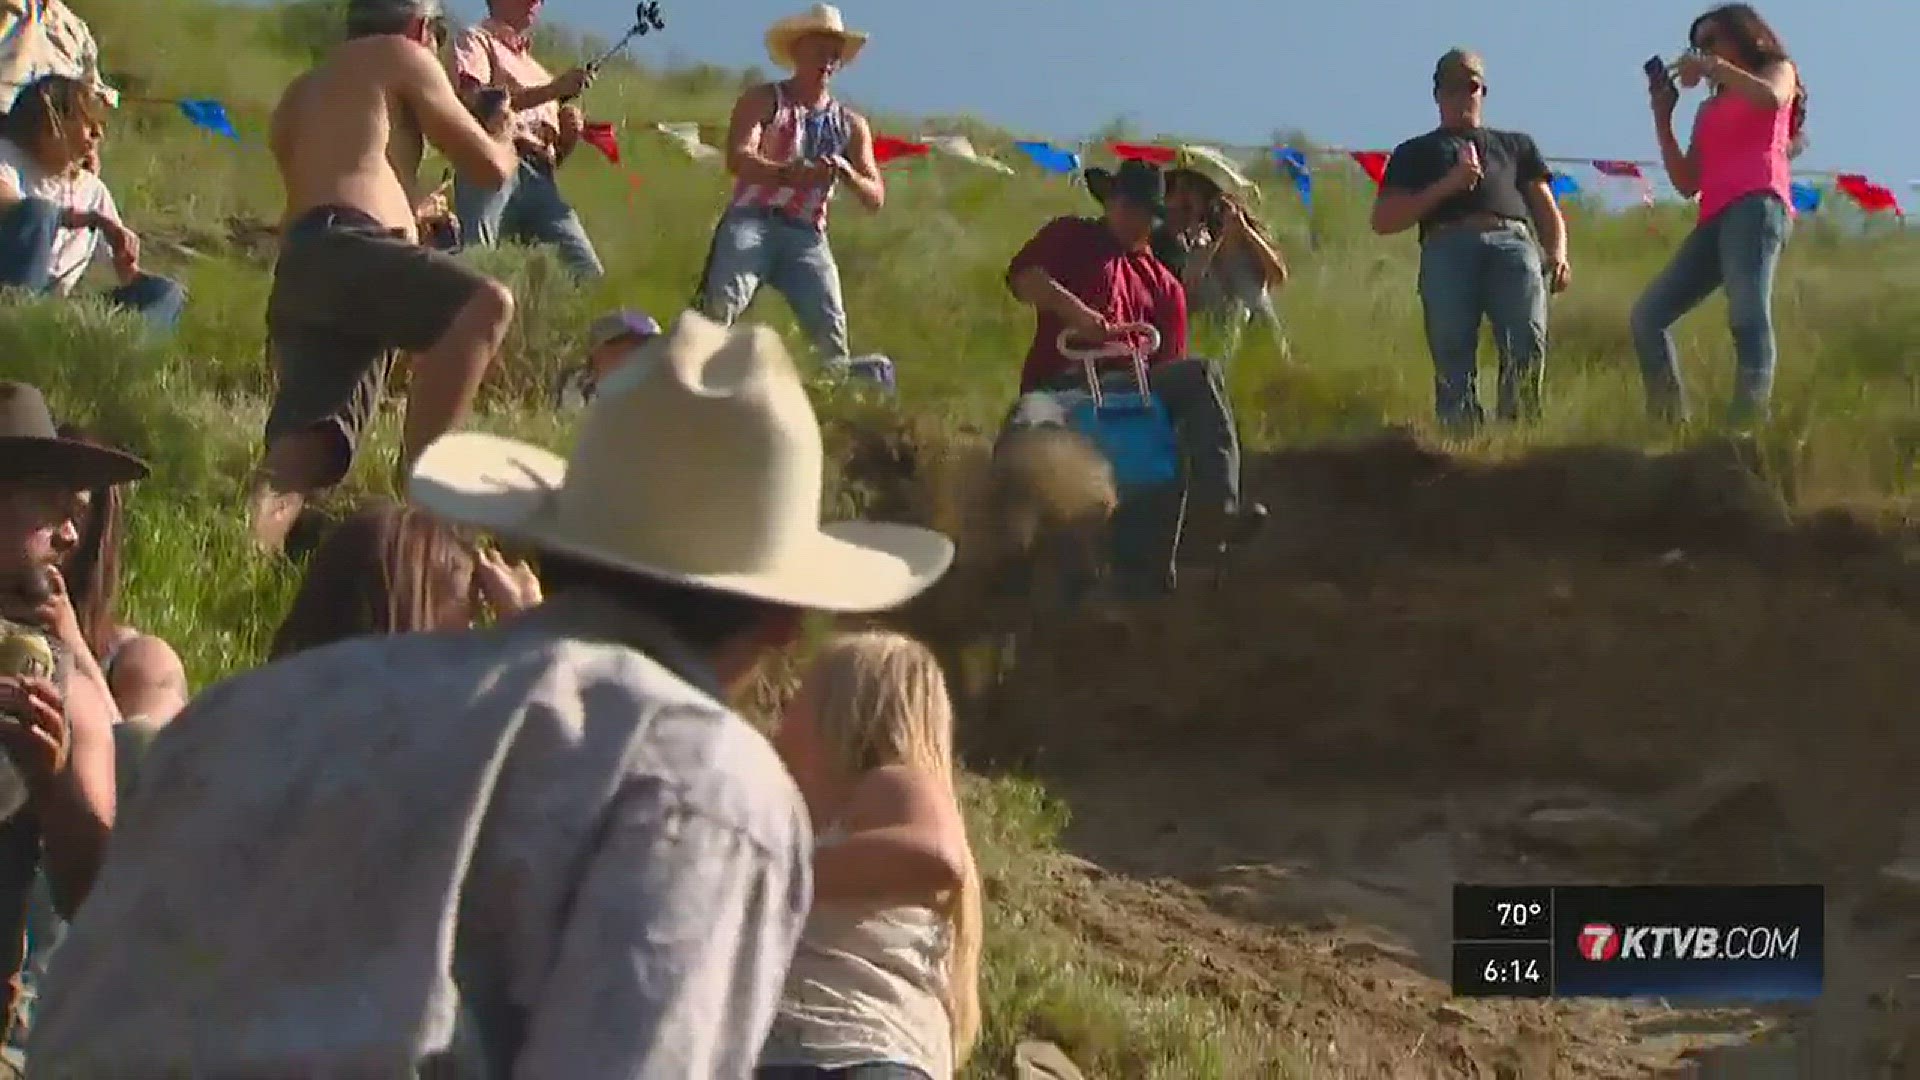 In this segment of Idaho Life, Brian Holmes checks out the Riggins Rodeo.